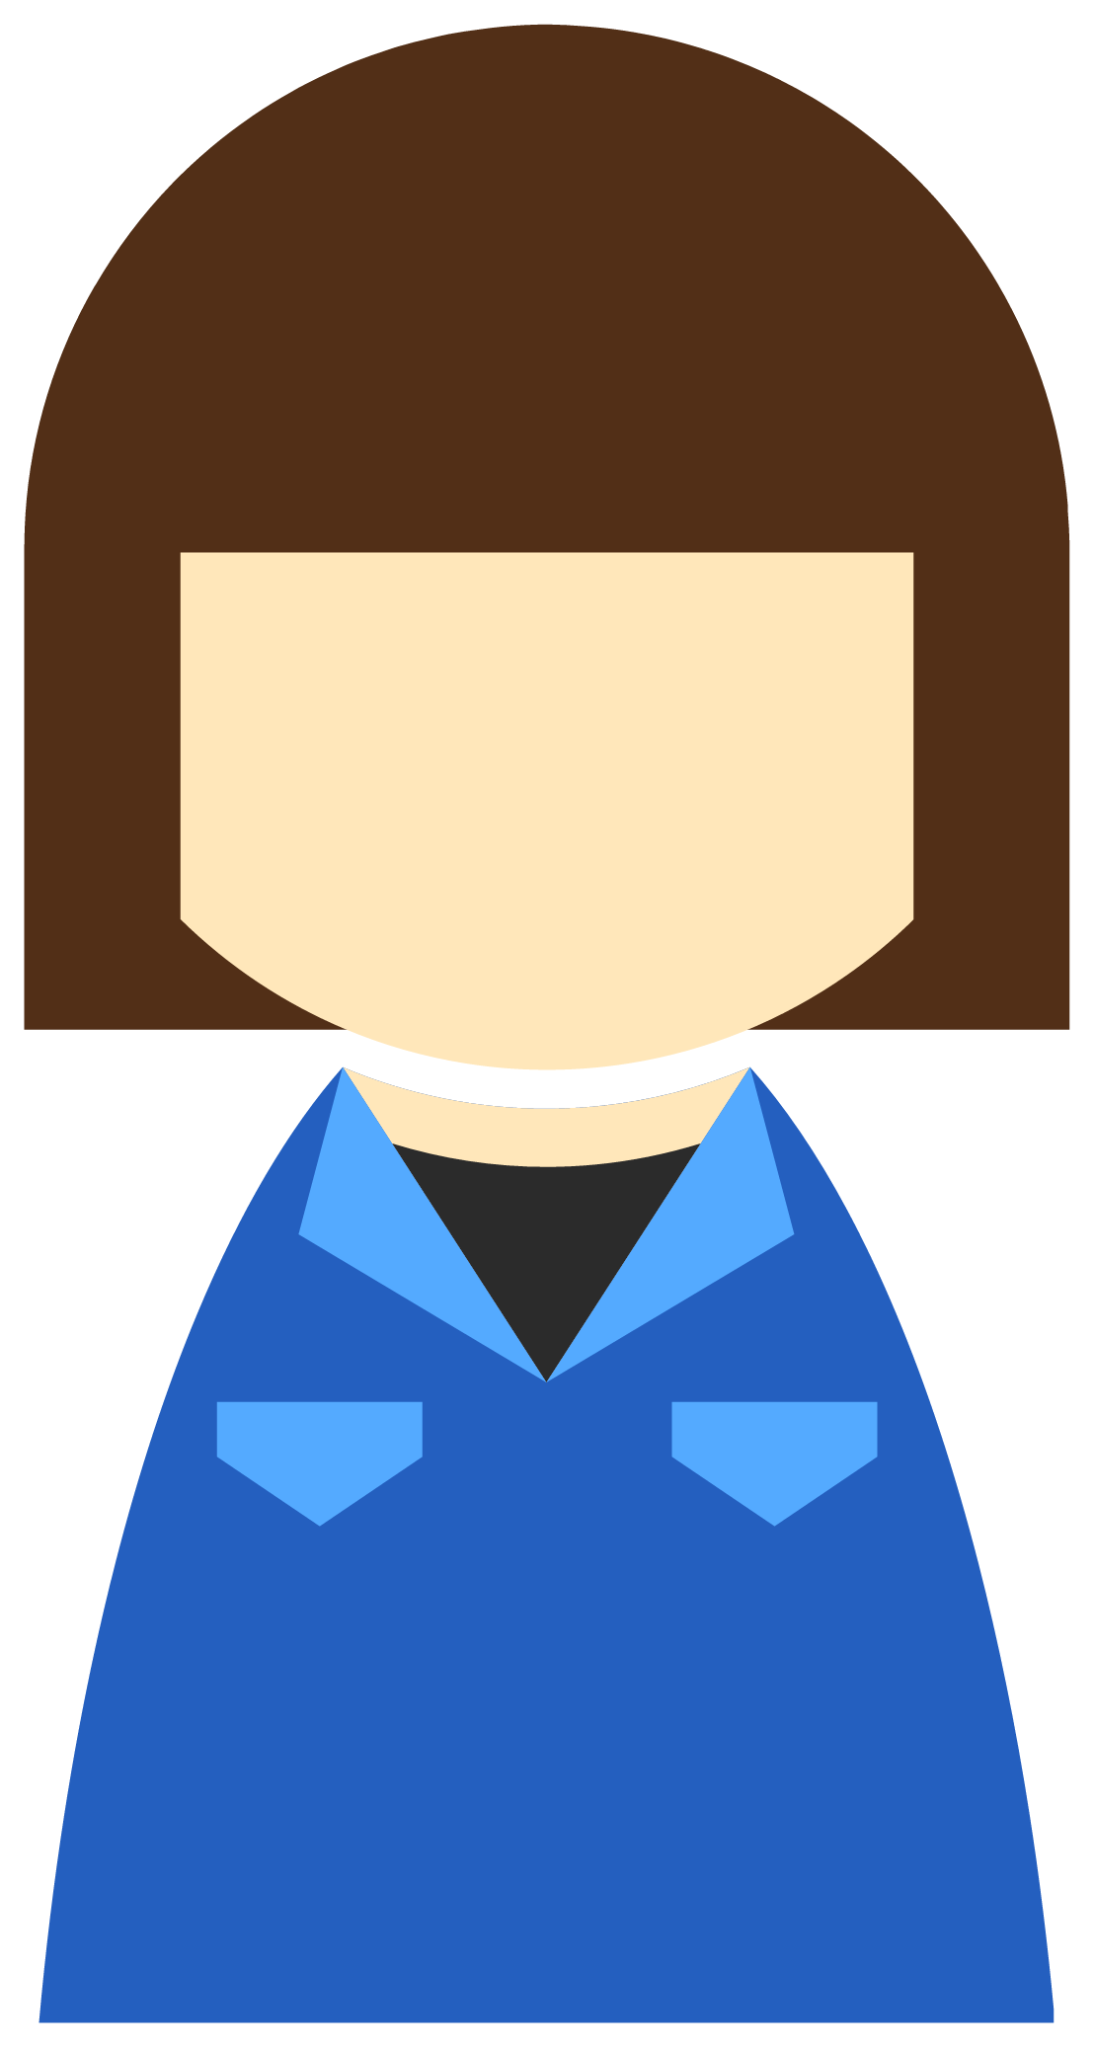 female work clothes blue icon